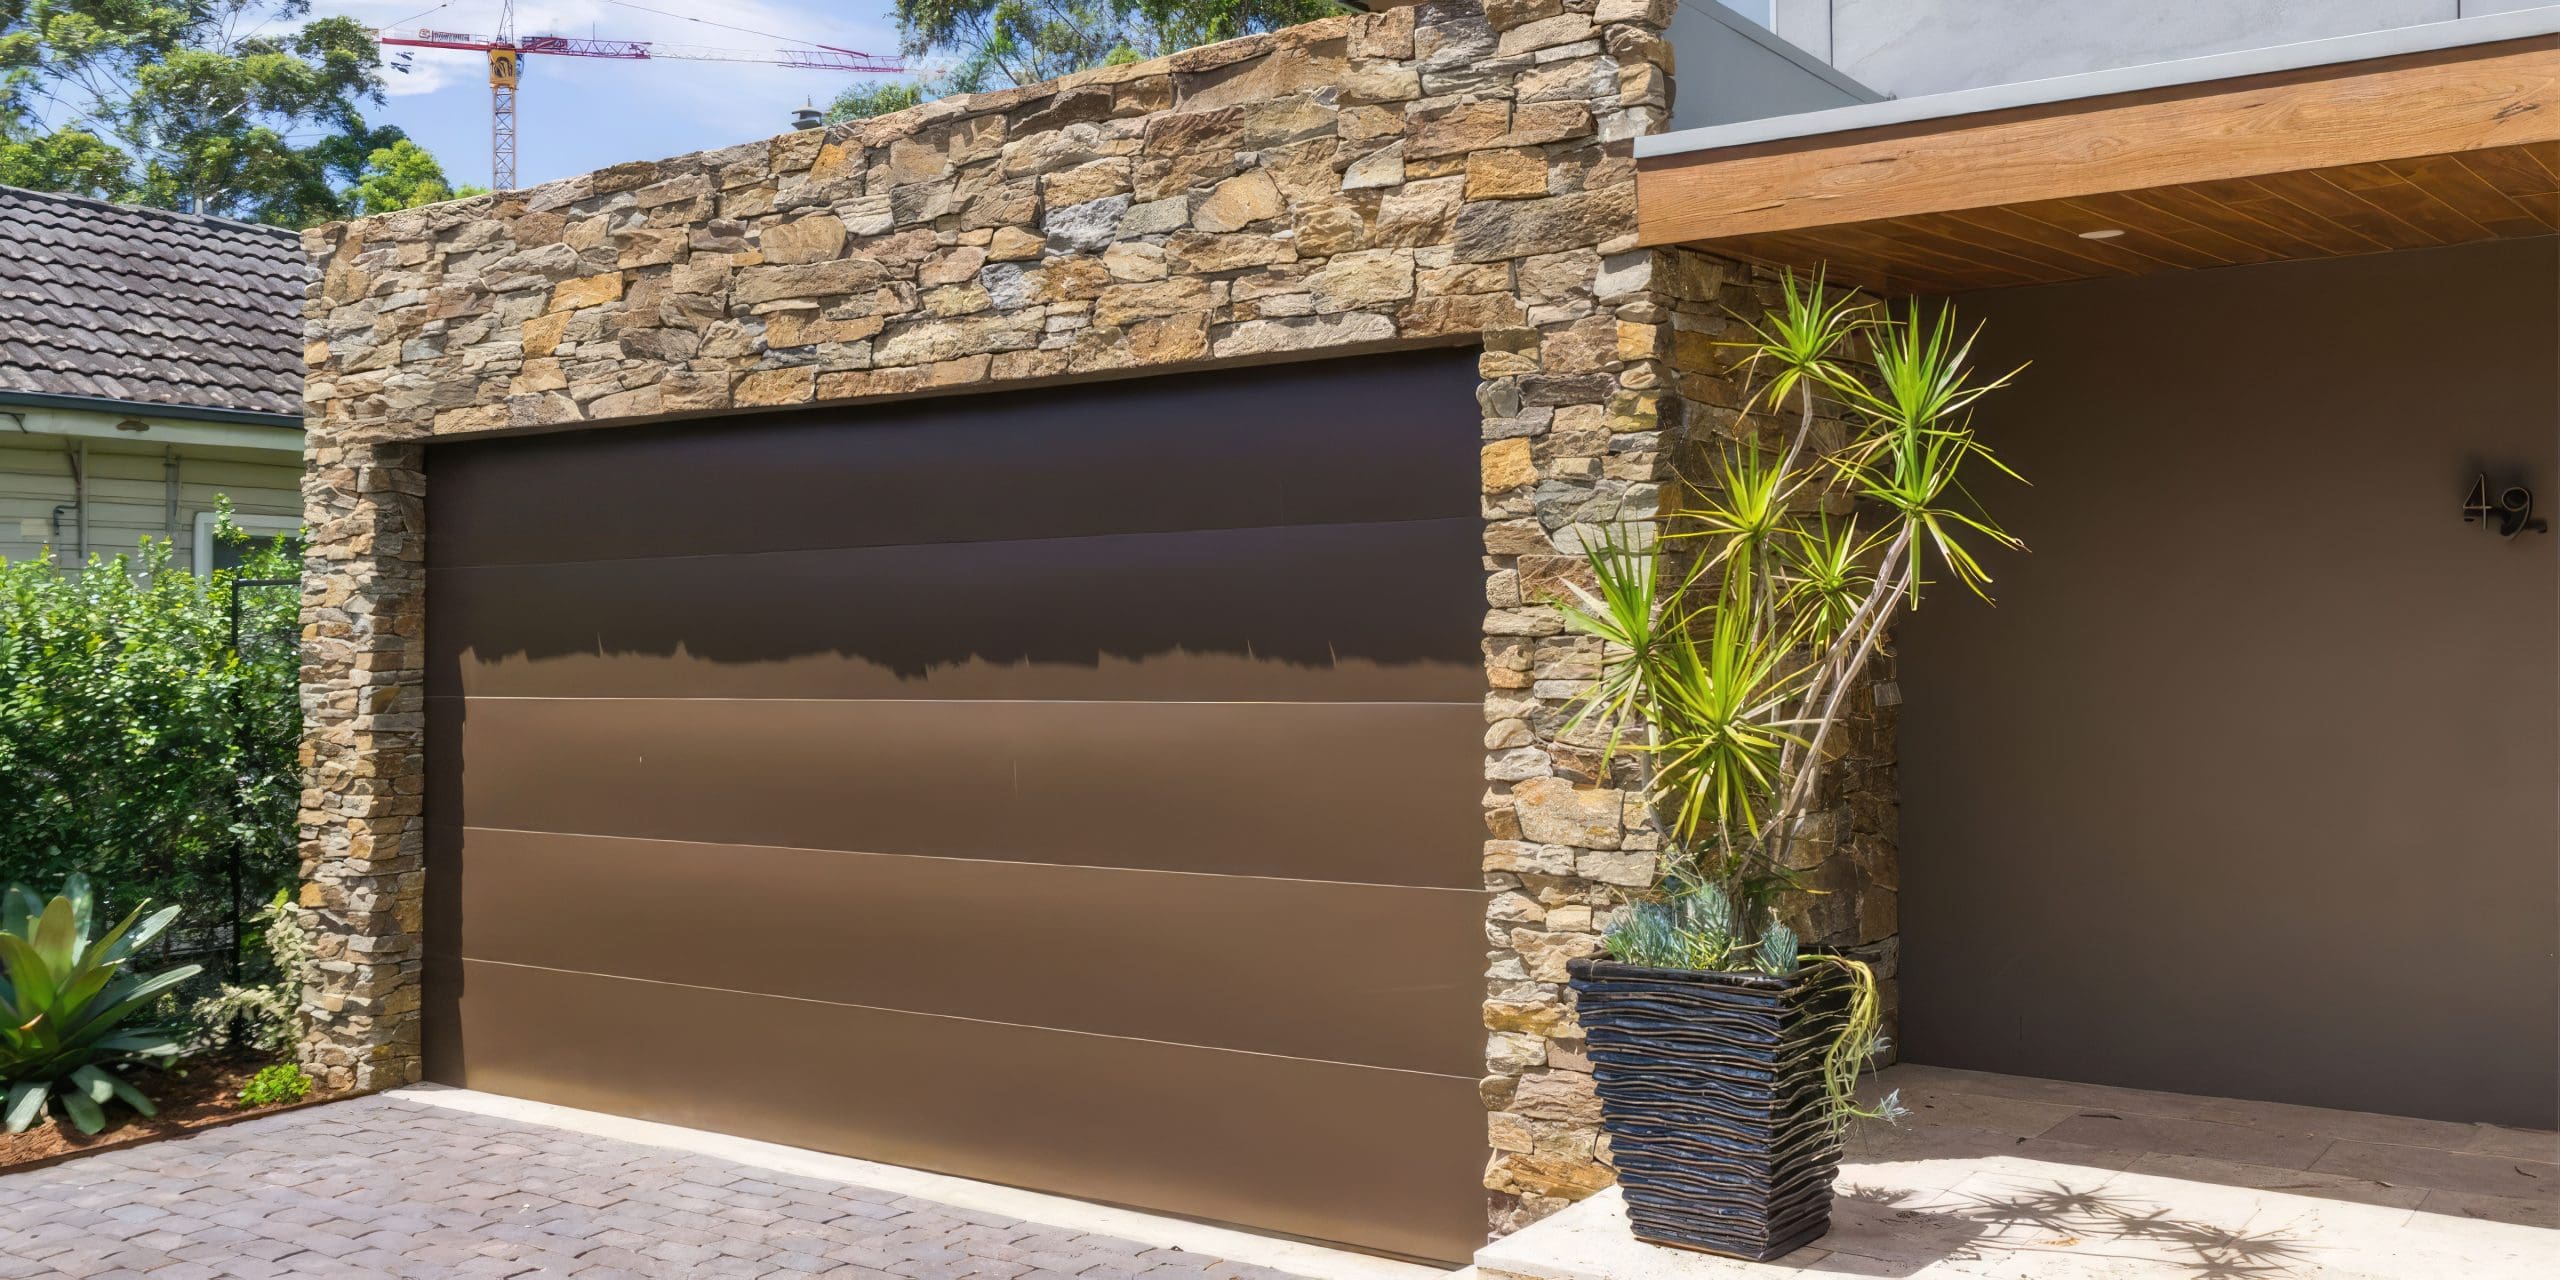 ALPINE DUST STONE WALL CLADDING_RMS TRADERS_NATURAL STONE FACADE WALL CLADDING SUPPLIER MELBOURNE (17)-gigapixel-standard-scale-4_00x